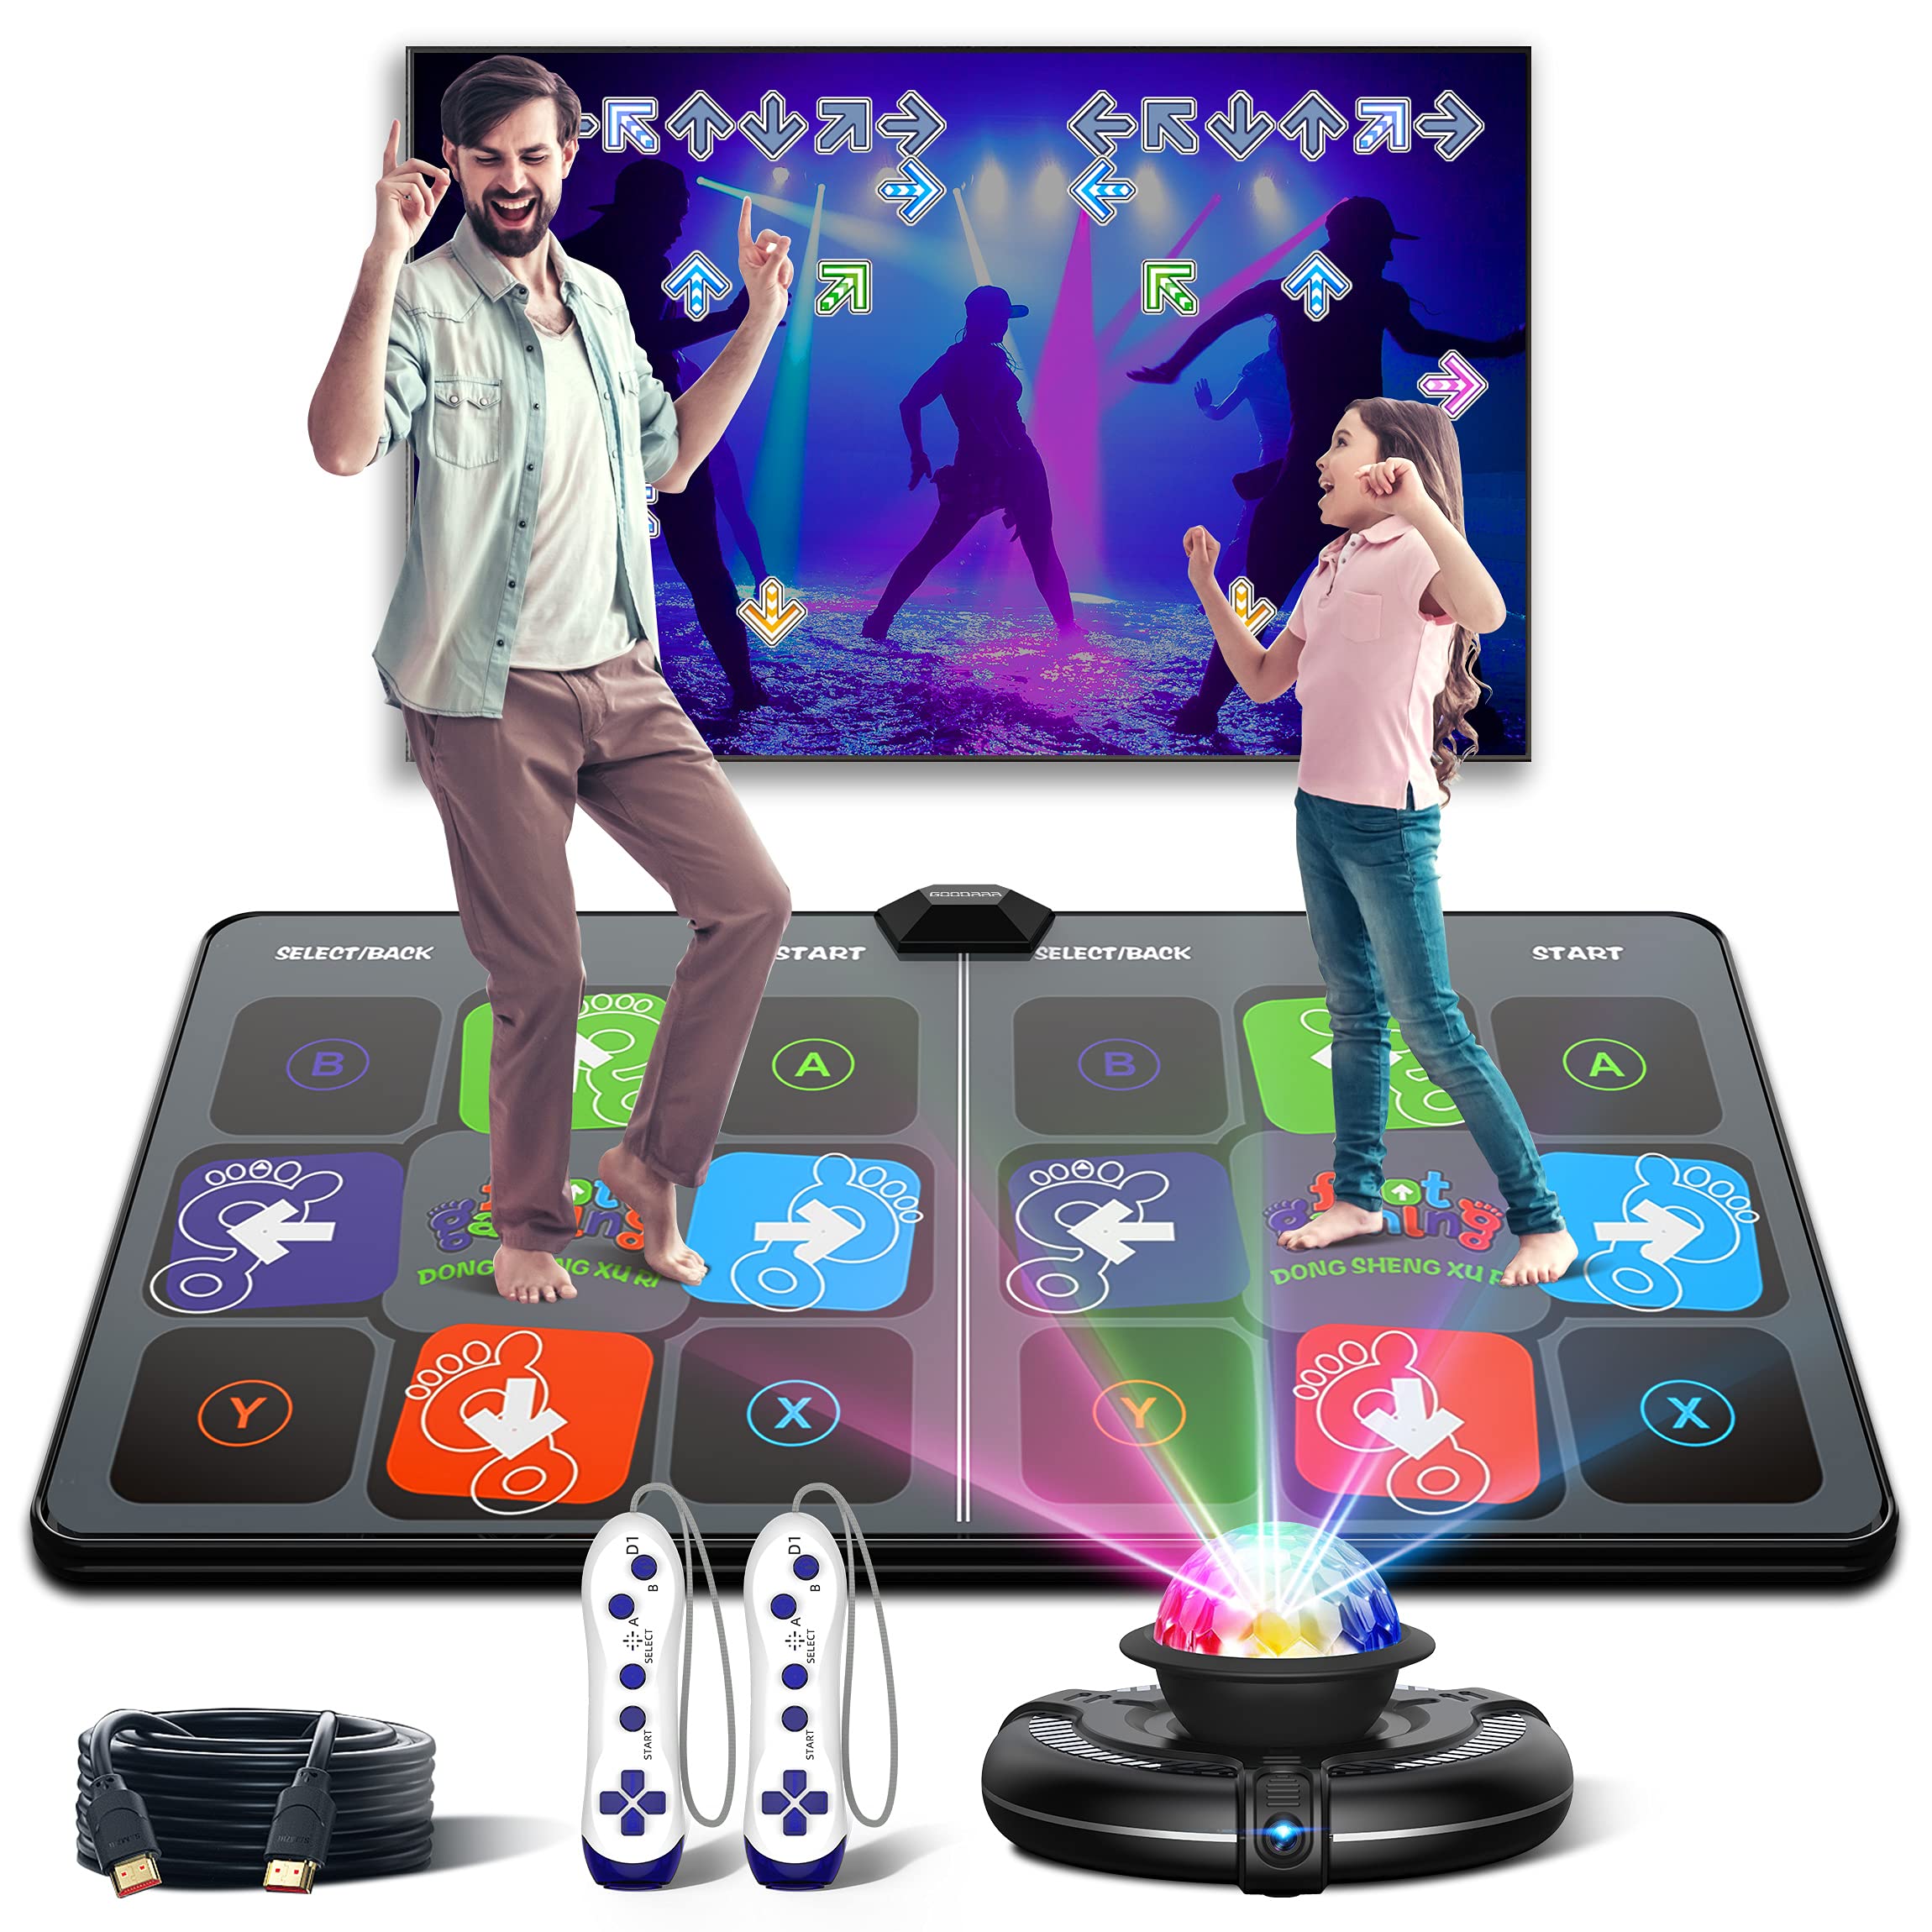 Dance Mat for Kids and Adults,Musical Electronic Dance mat, Double User Yoga Dance Floor mat with Wireless Handle, HD Camera Game Multi-Function Host, Non-Slip Dance Pad